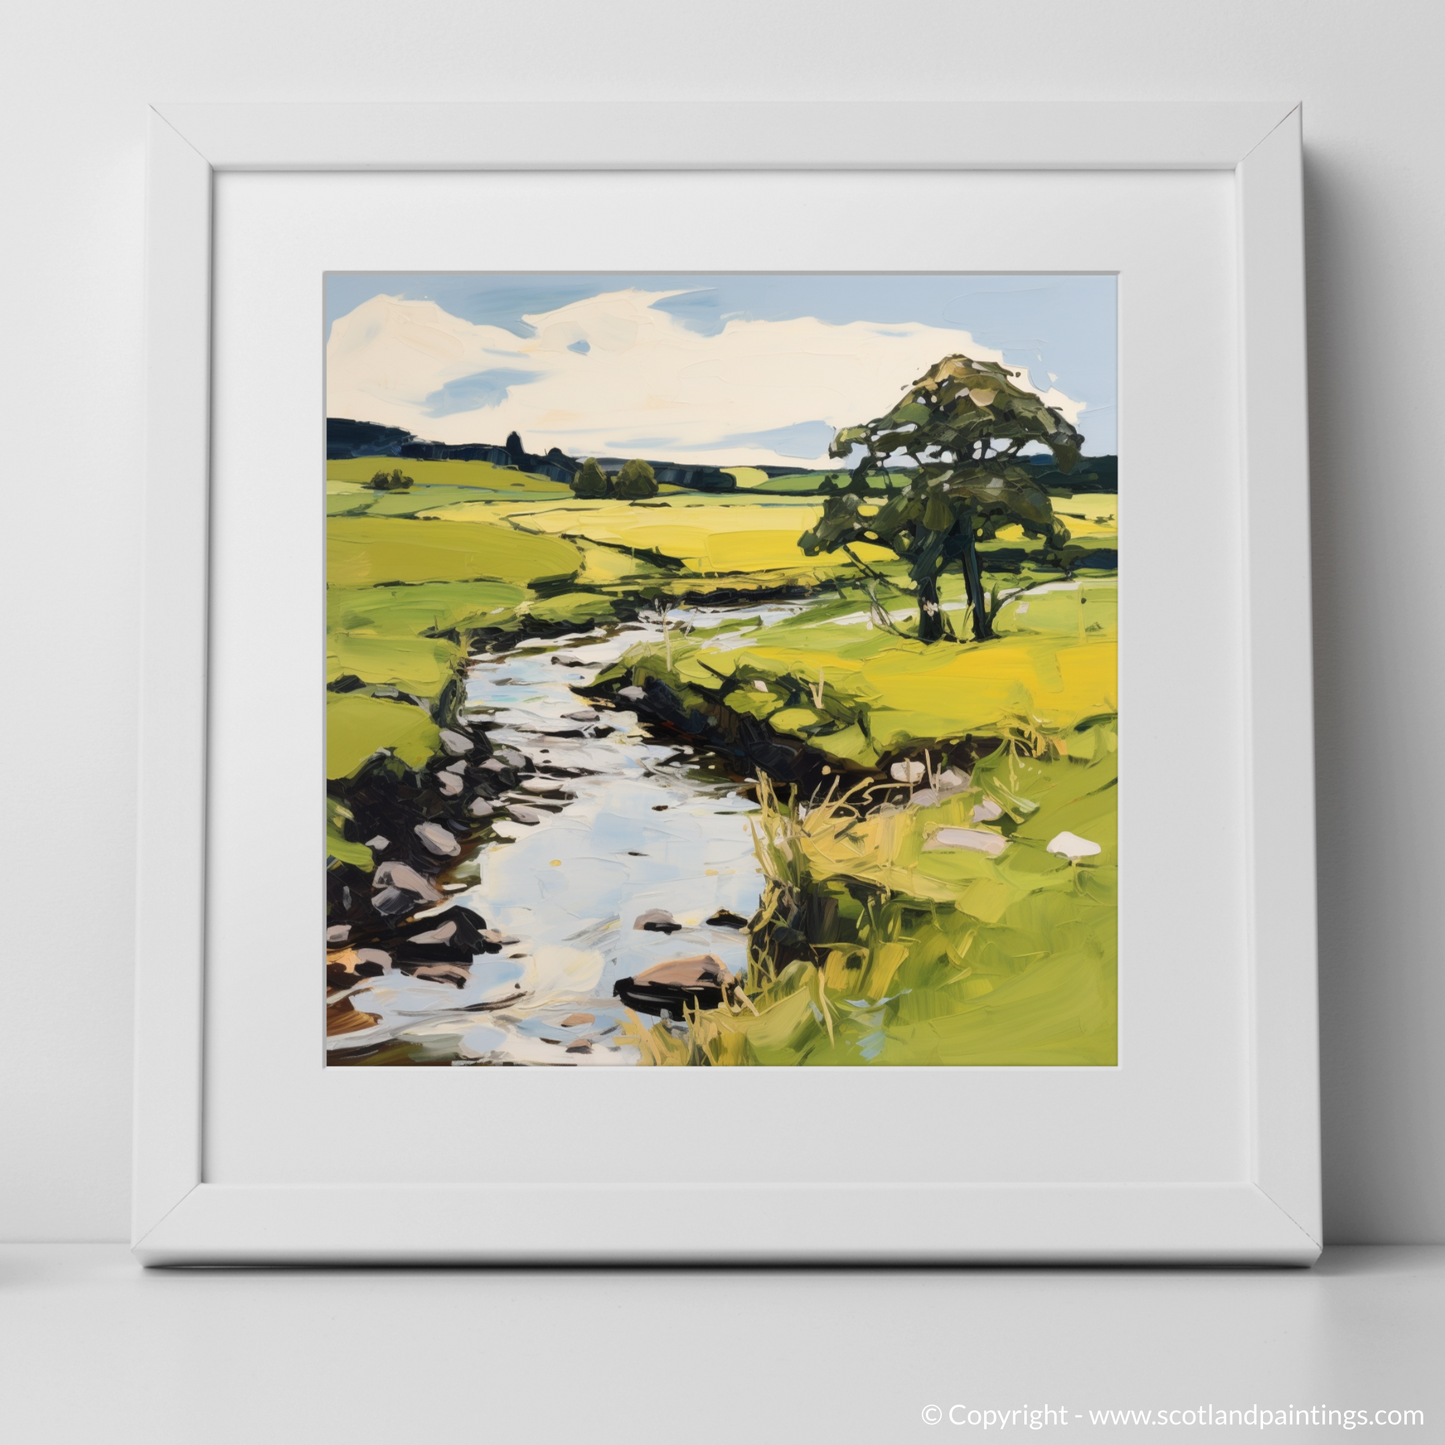 Art Print of River Deveron, Aberdeenshire in summer with a white frame